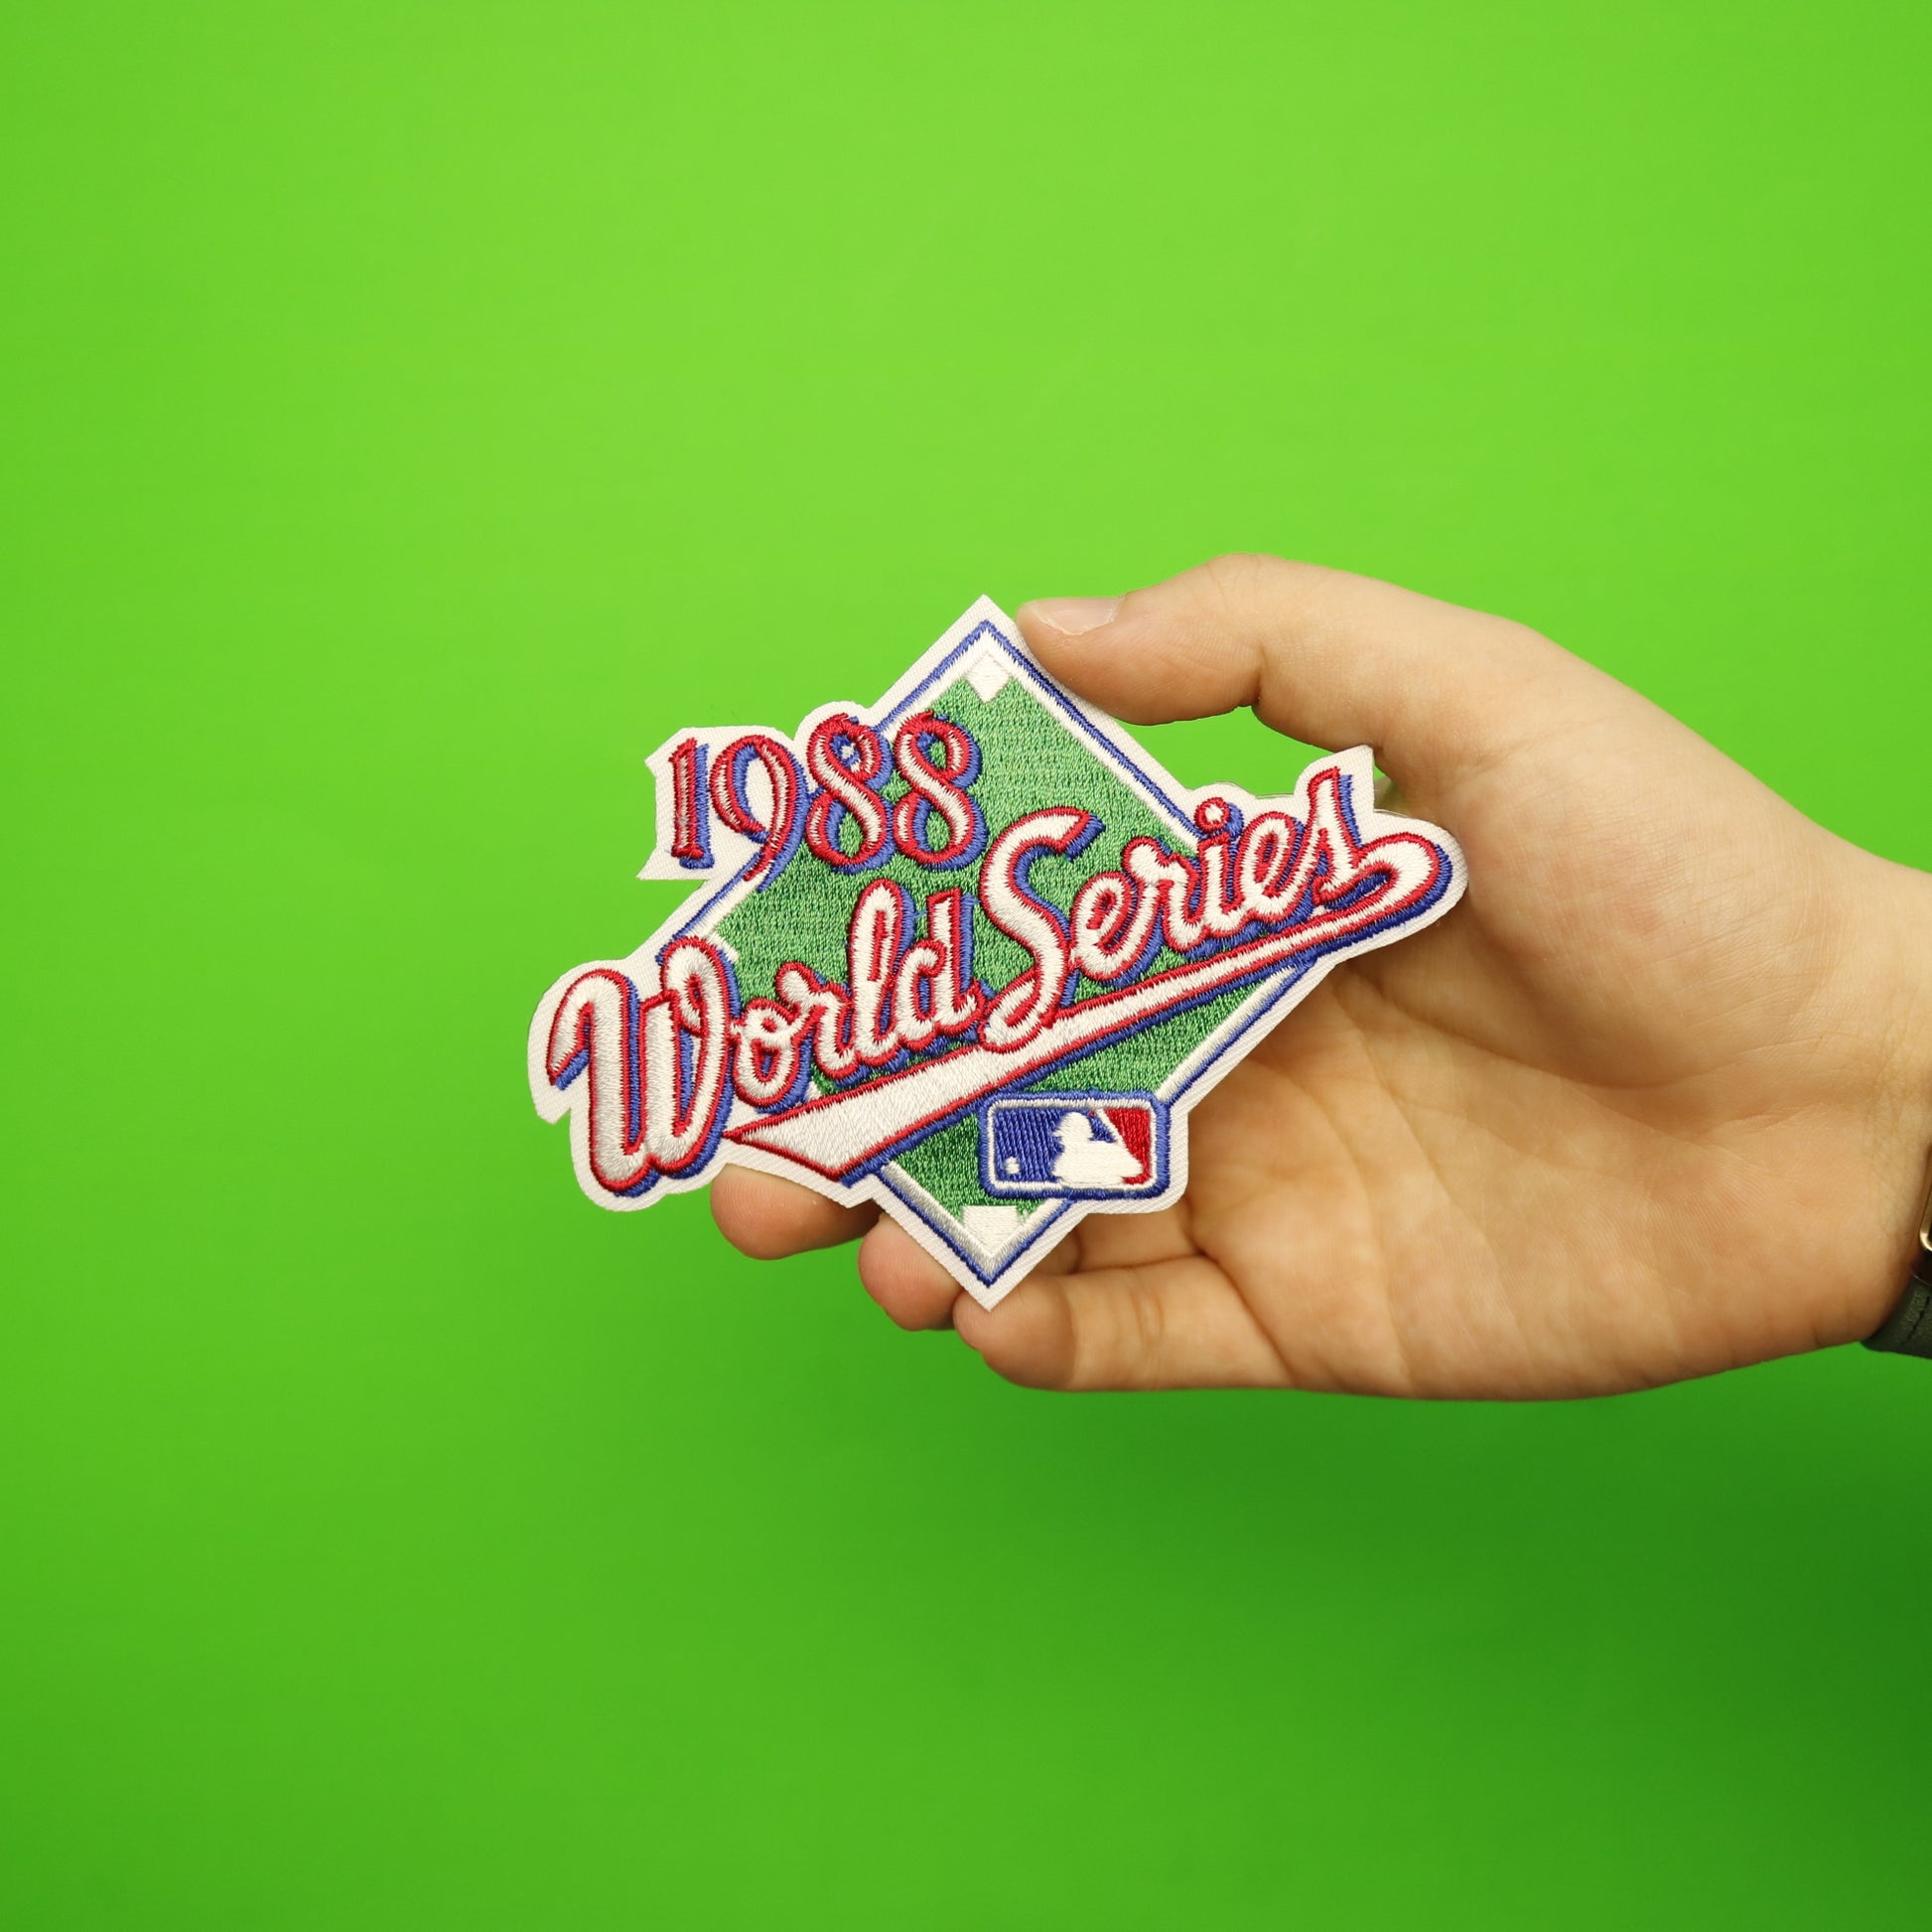 1988 MLB World Series Logo Jersey Patch Los Angeles Dodgers vs. Oakland  Athletics – Patch Collection